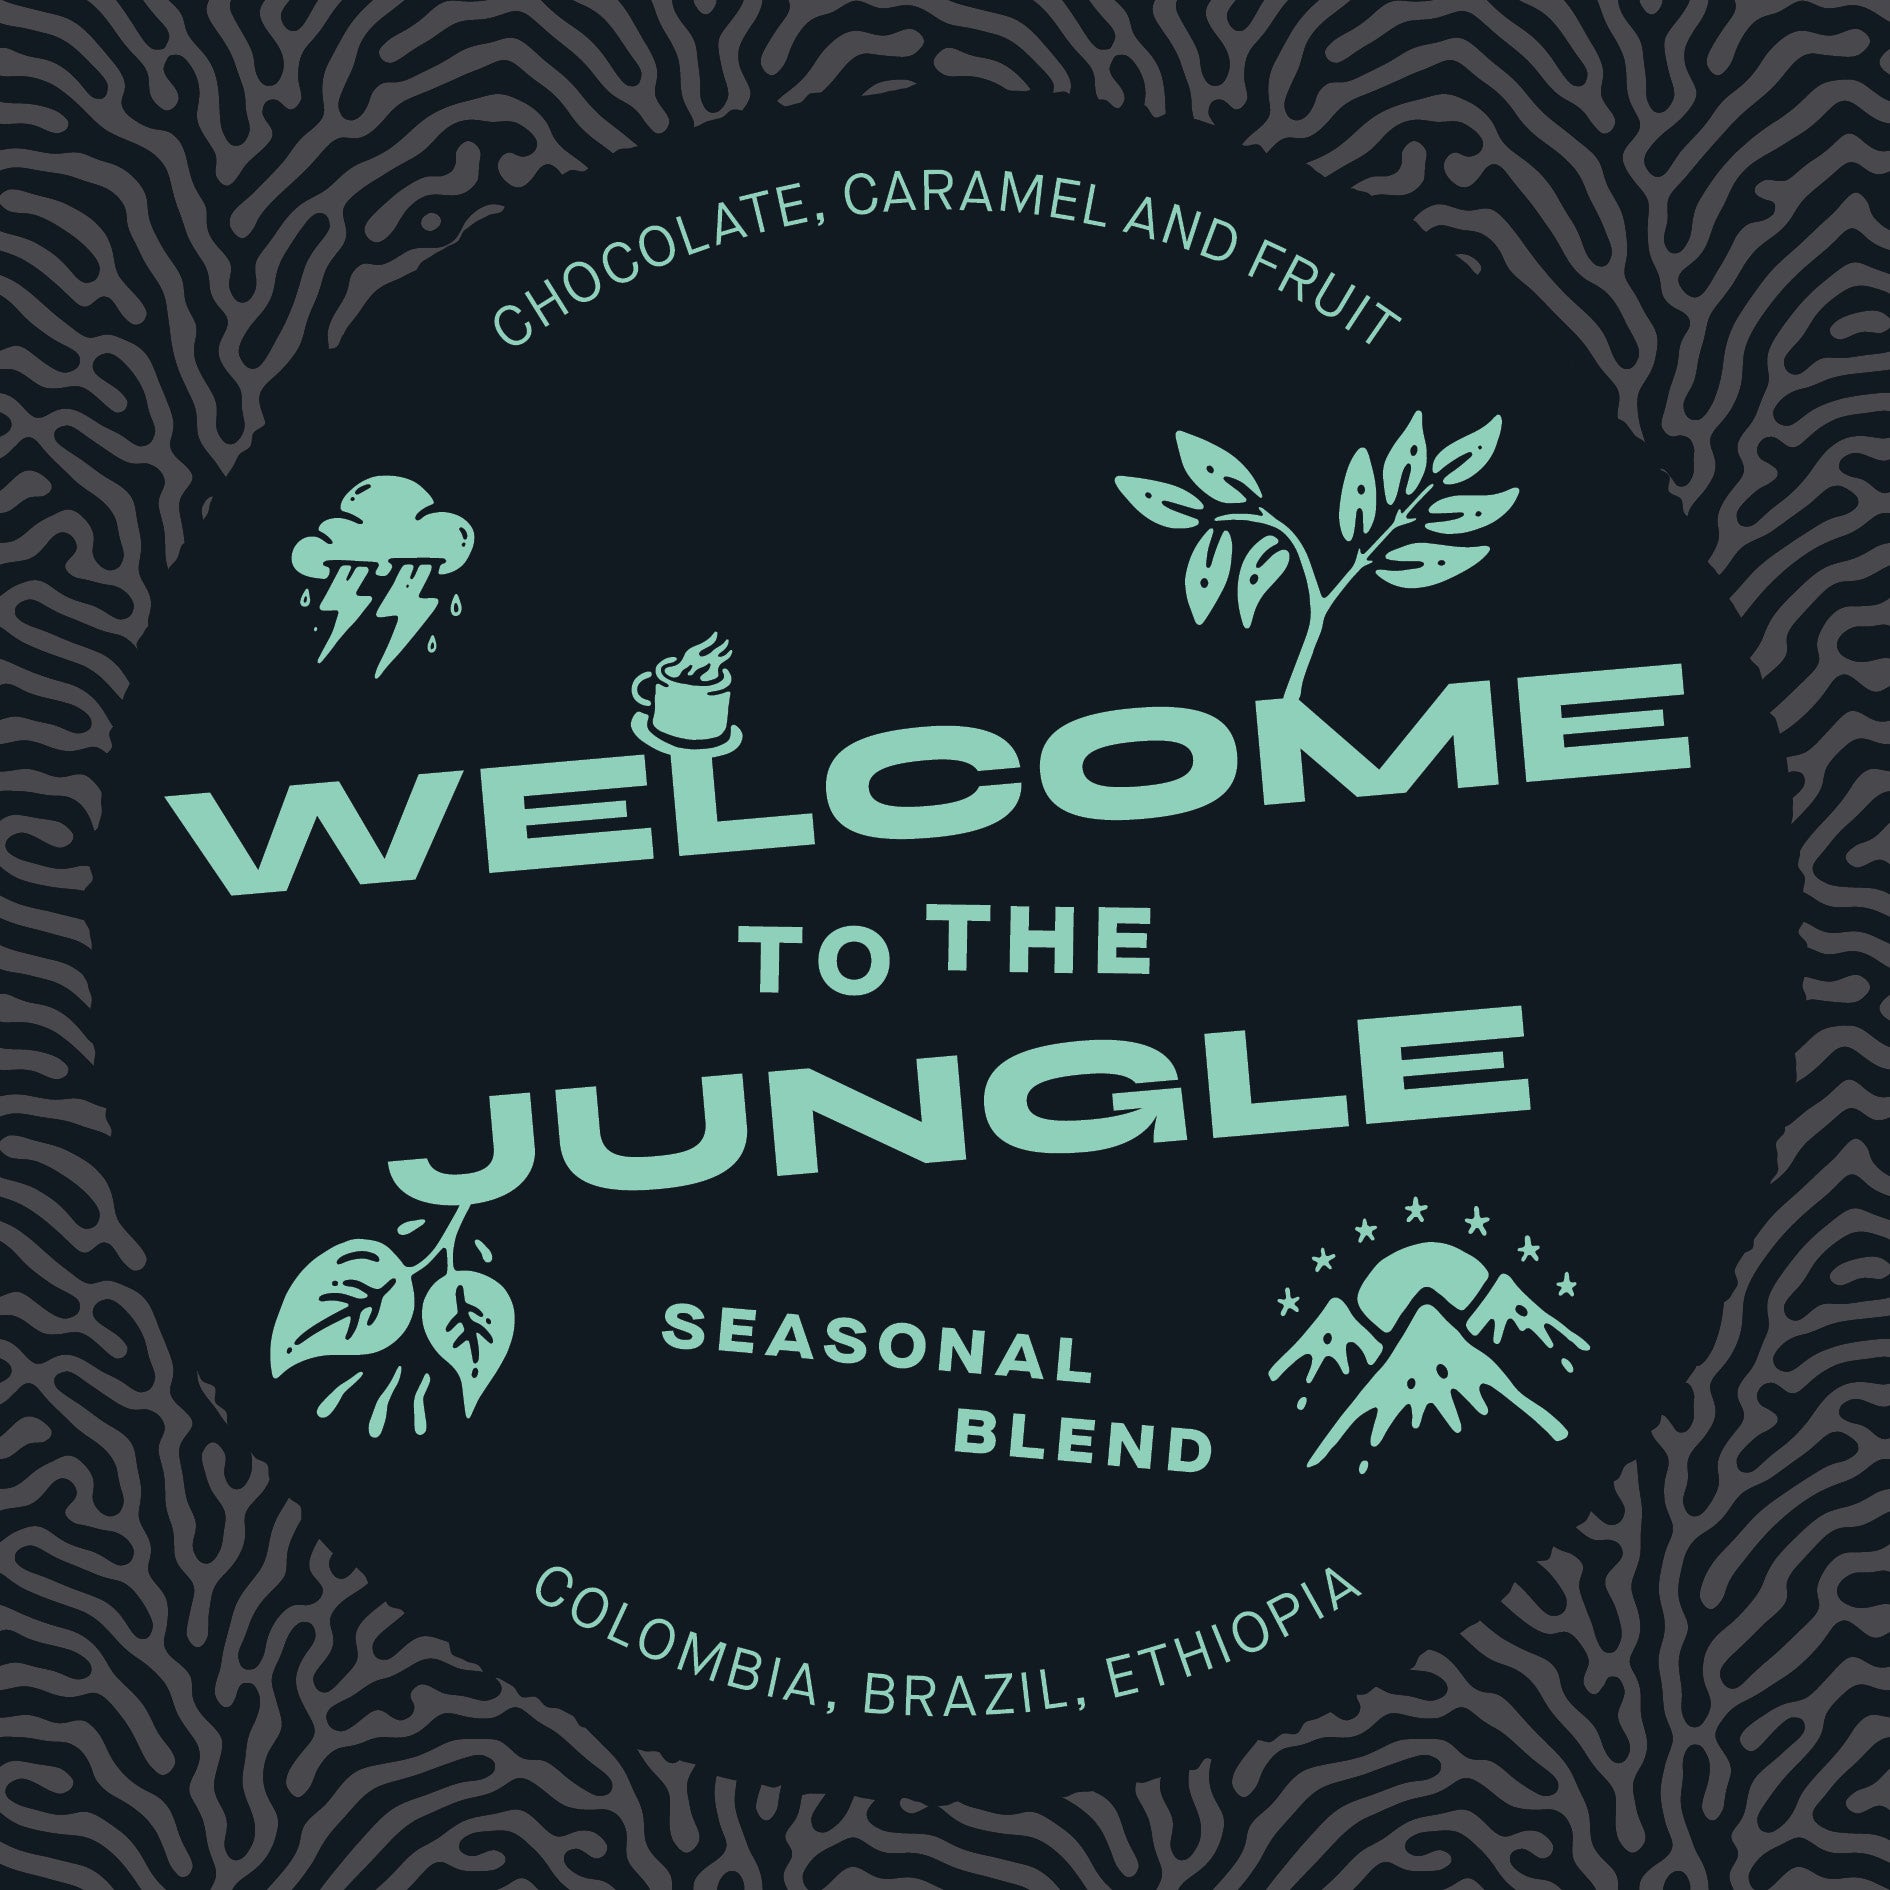 Welcome to the Jungle | Blend